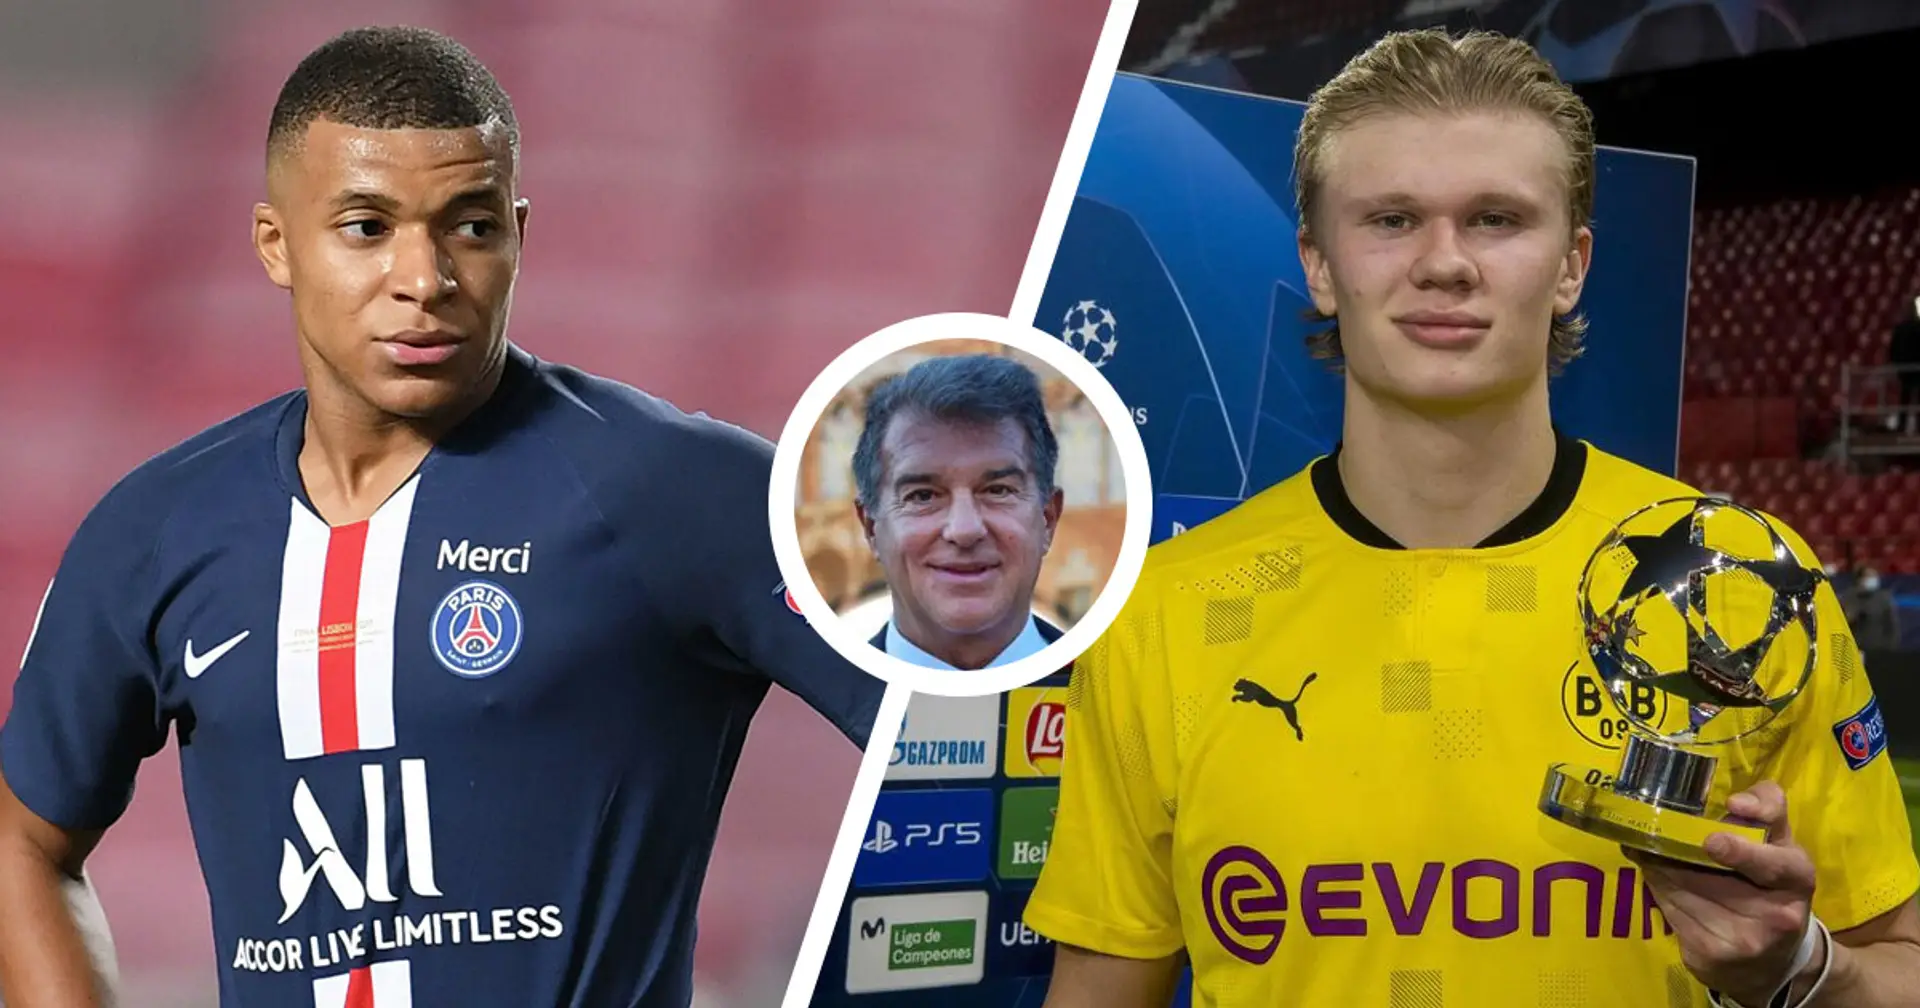 Laporta: 'Haaland and Mbappe? With me, Barca will be able to sign the most interesting players on the market'